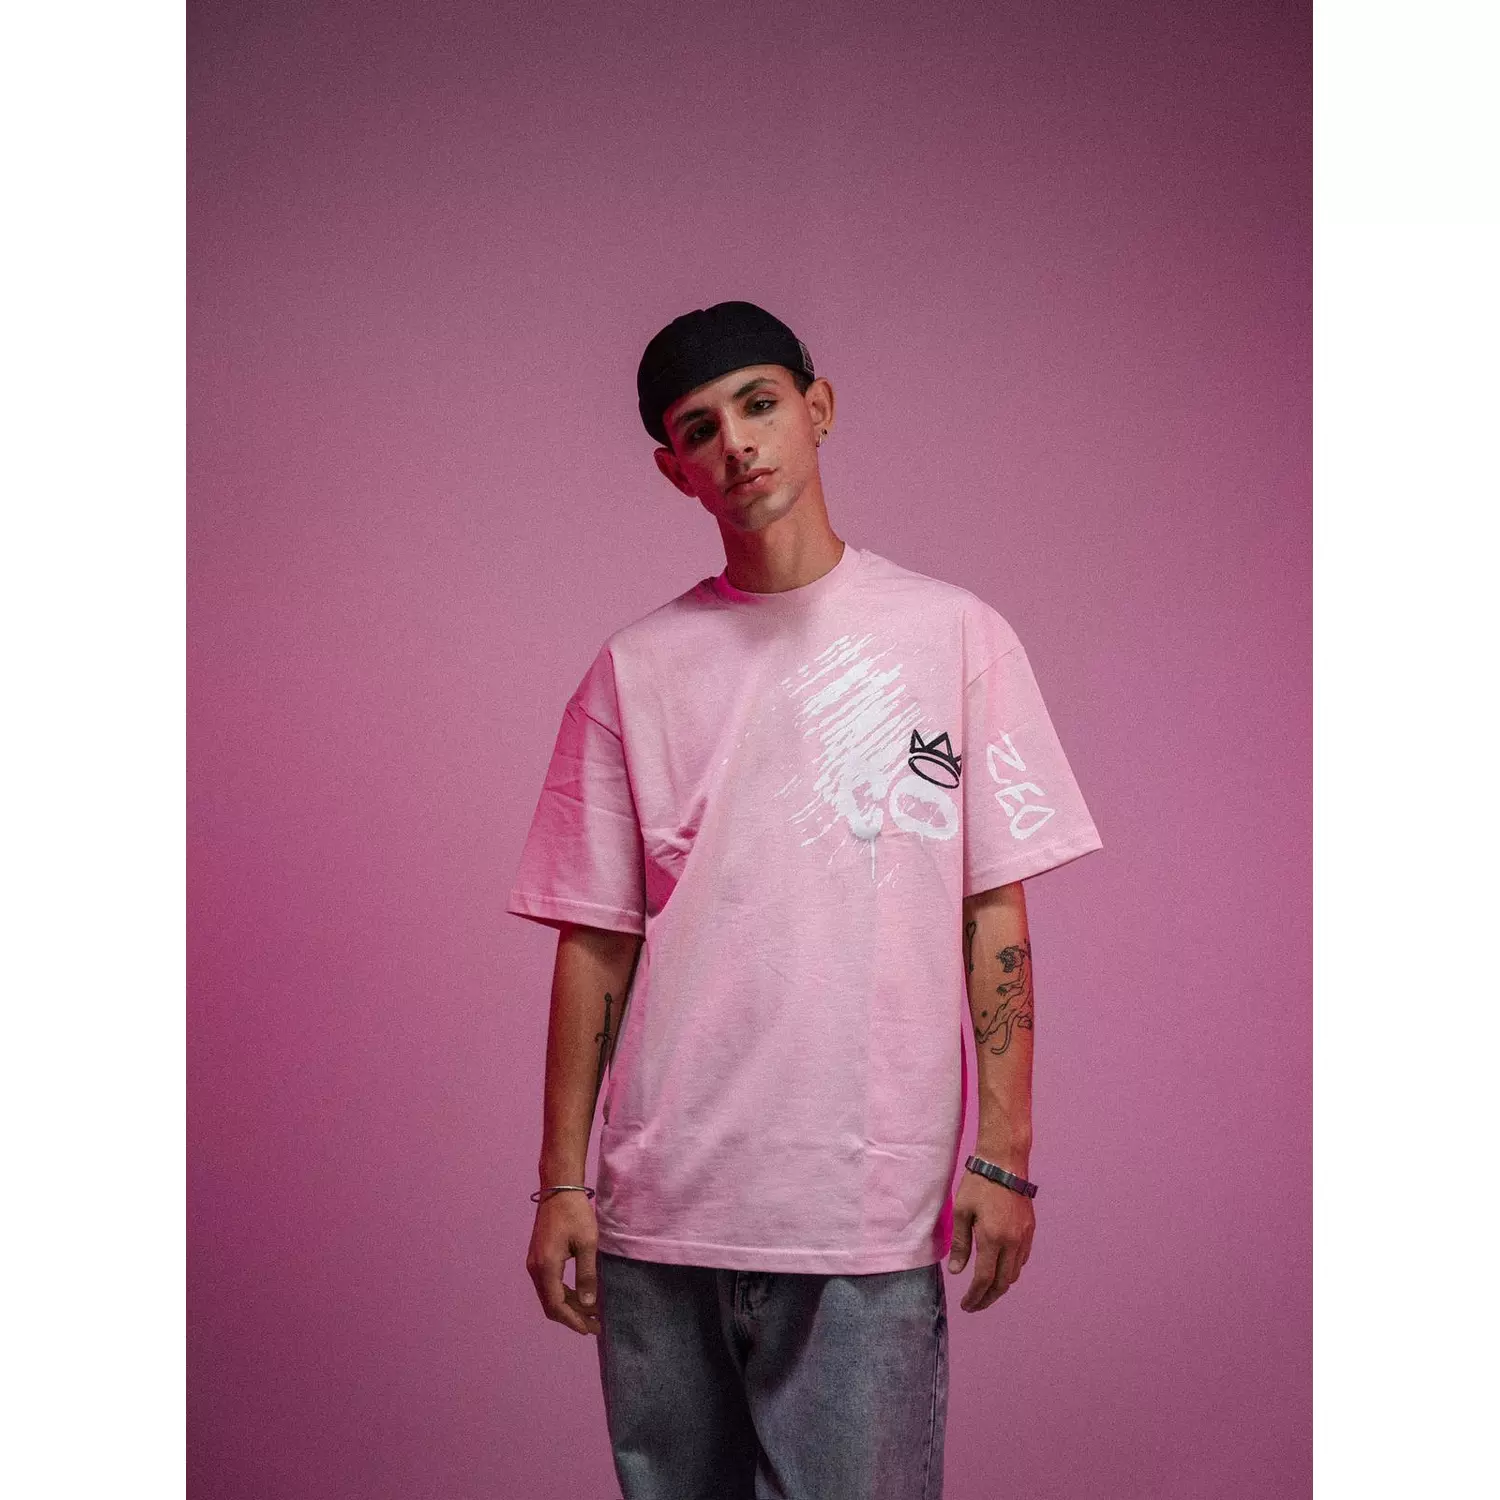 The PINK T-SHIRT  hover image